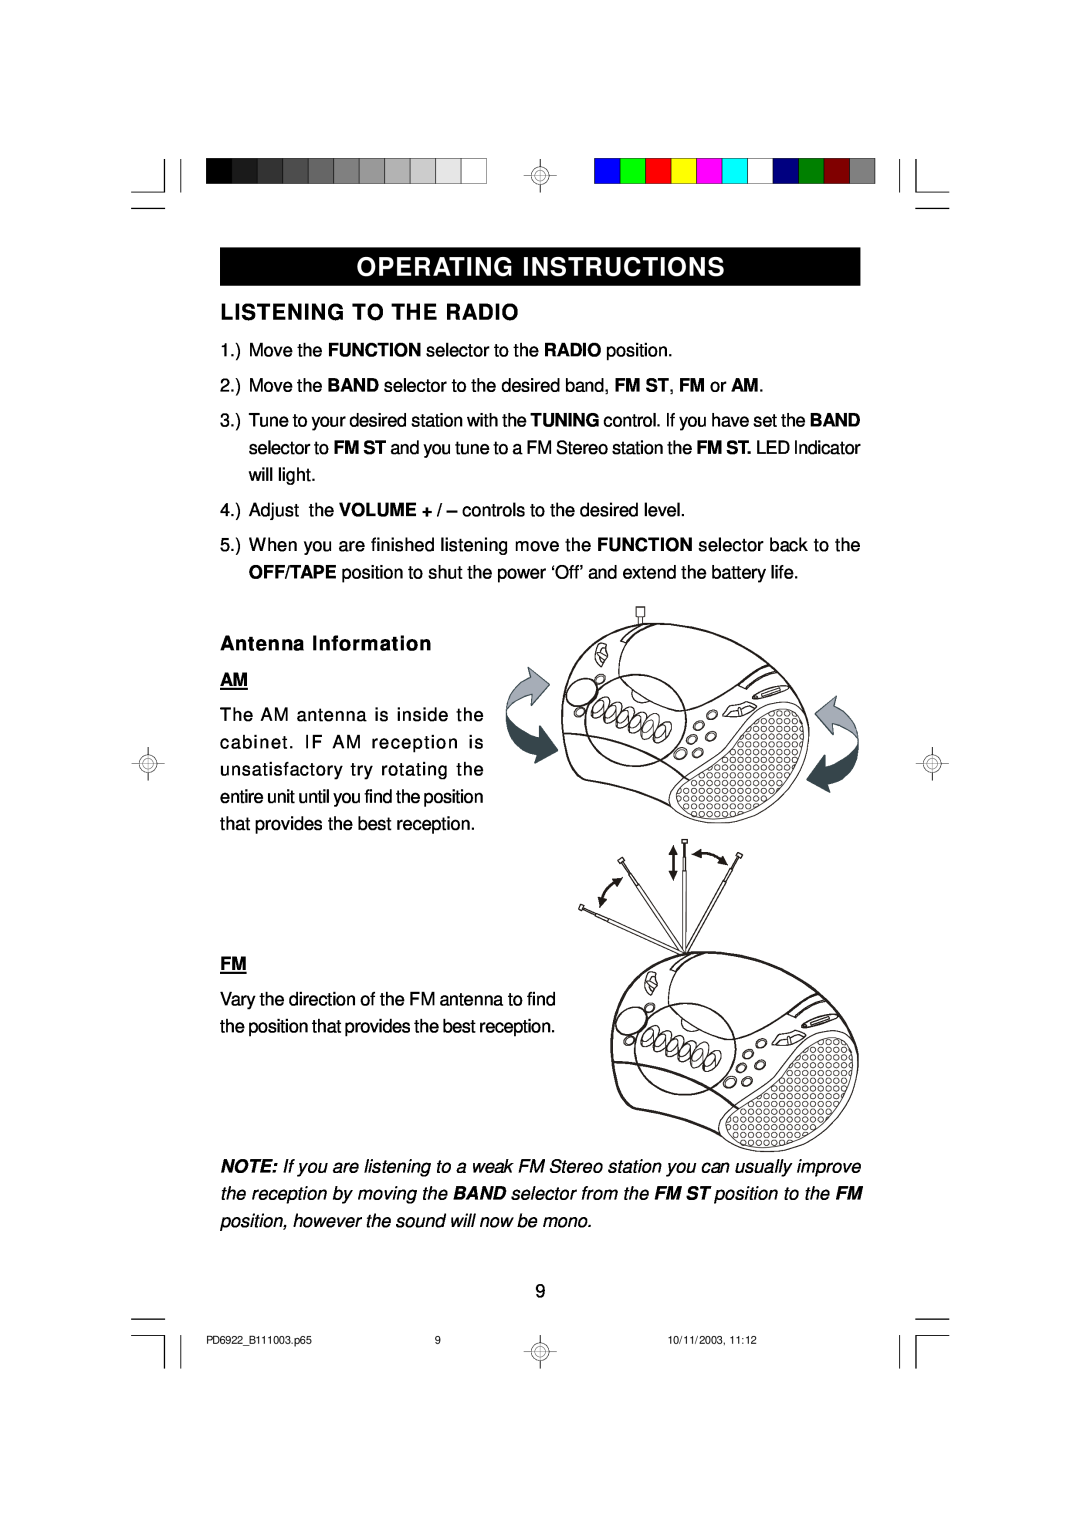 Emerson PD6922 owner manual Operating Instructions, Listening To The Radio, Antenna Information 